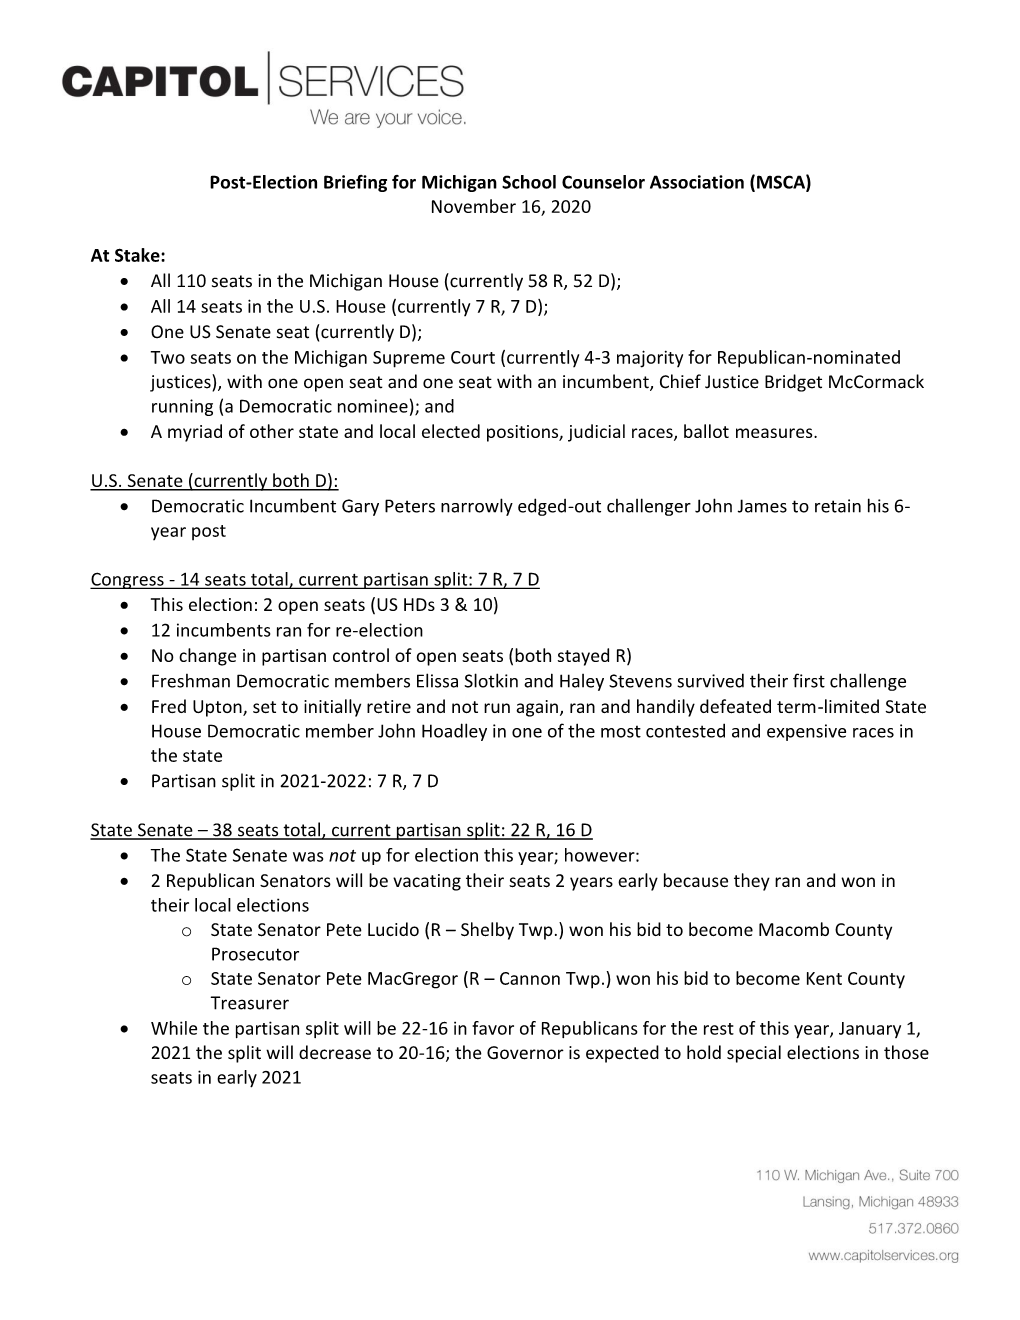 Post-Election Briefing for Michigan School Counselor Association (MSCA) November 16, 2020